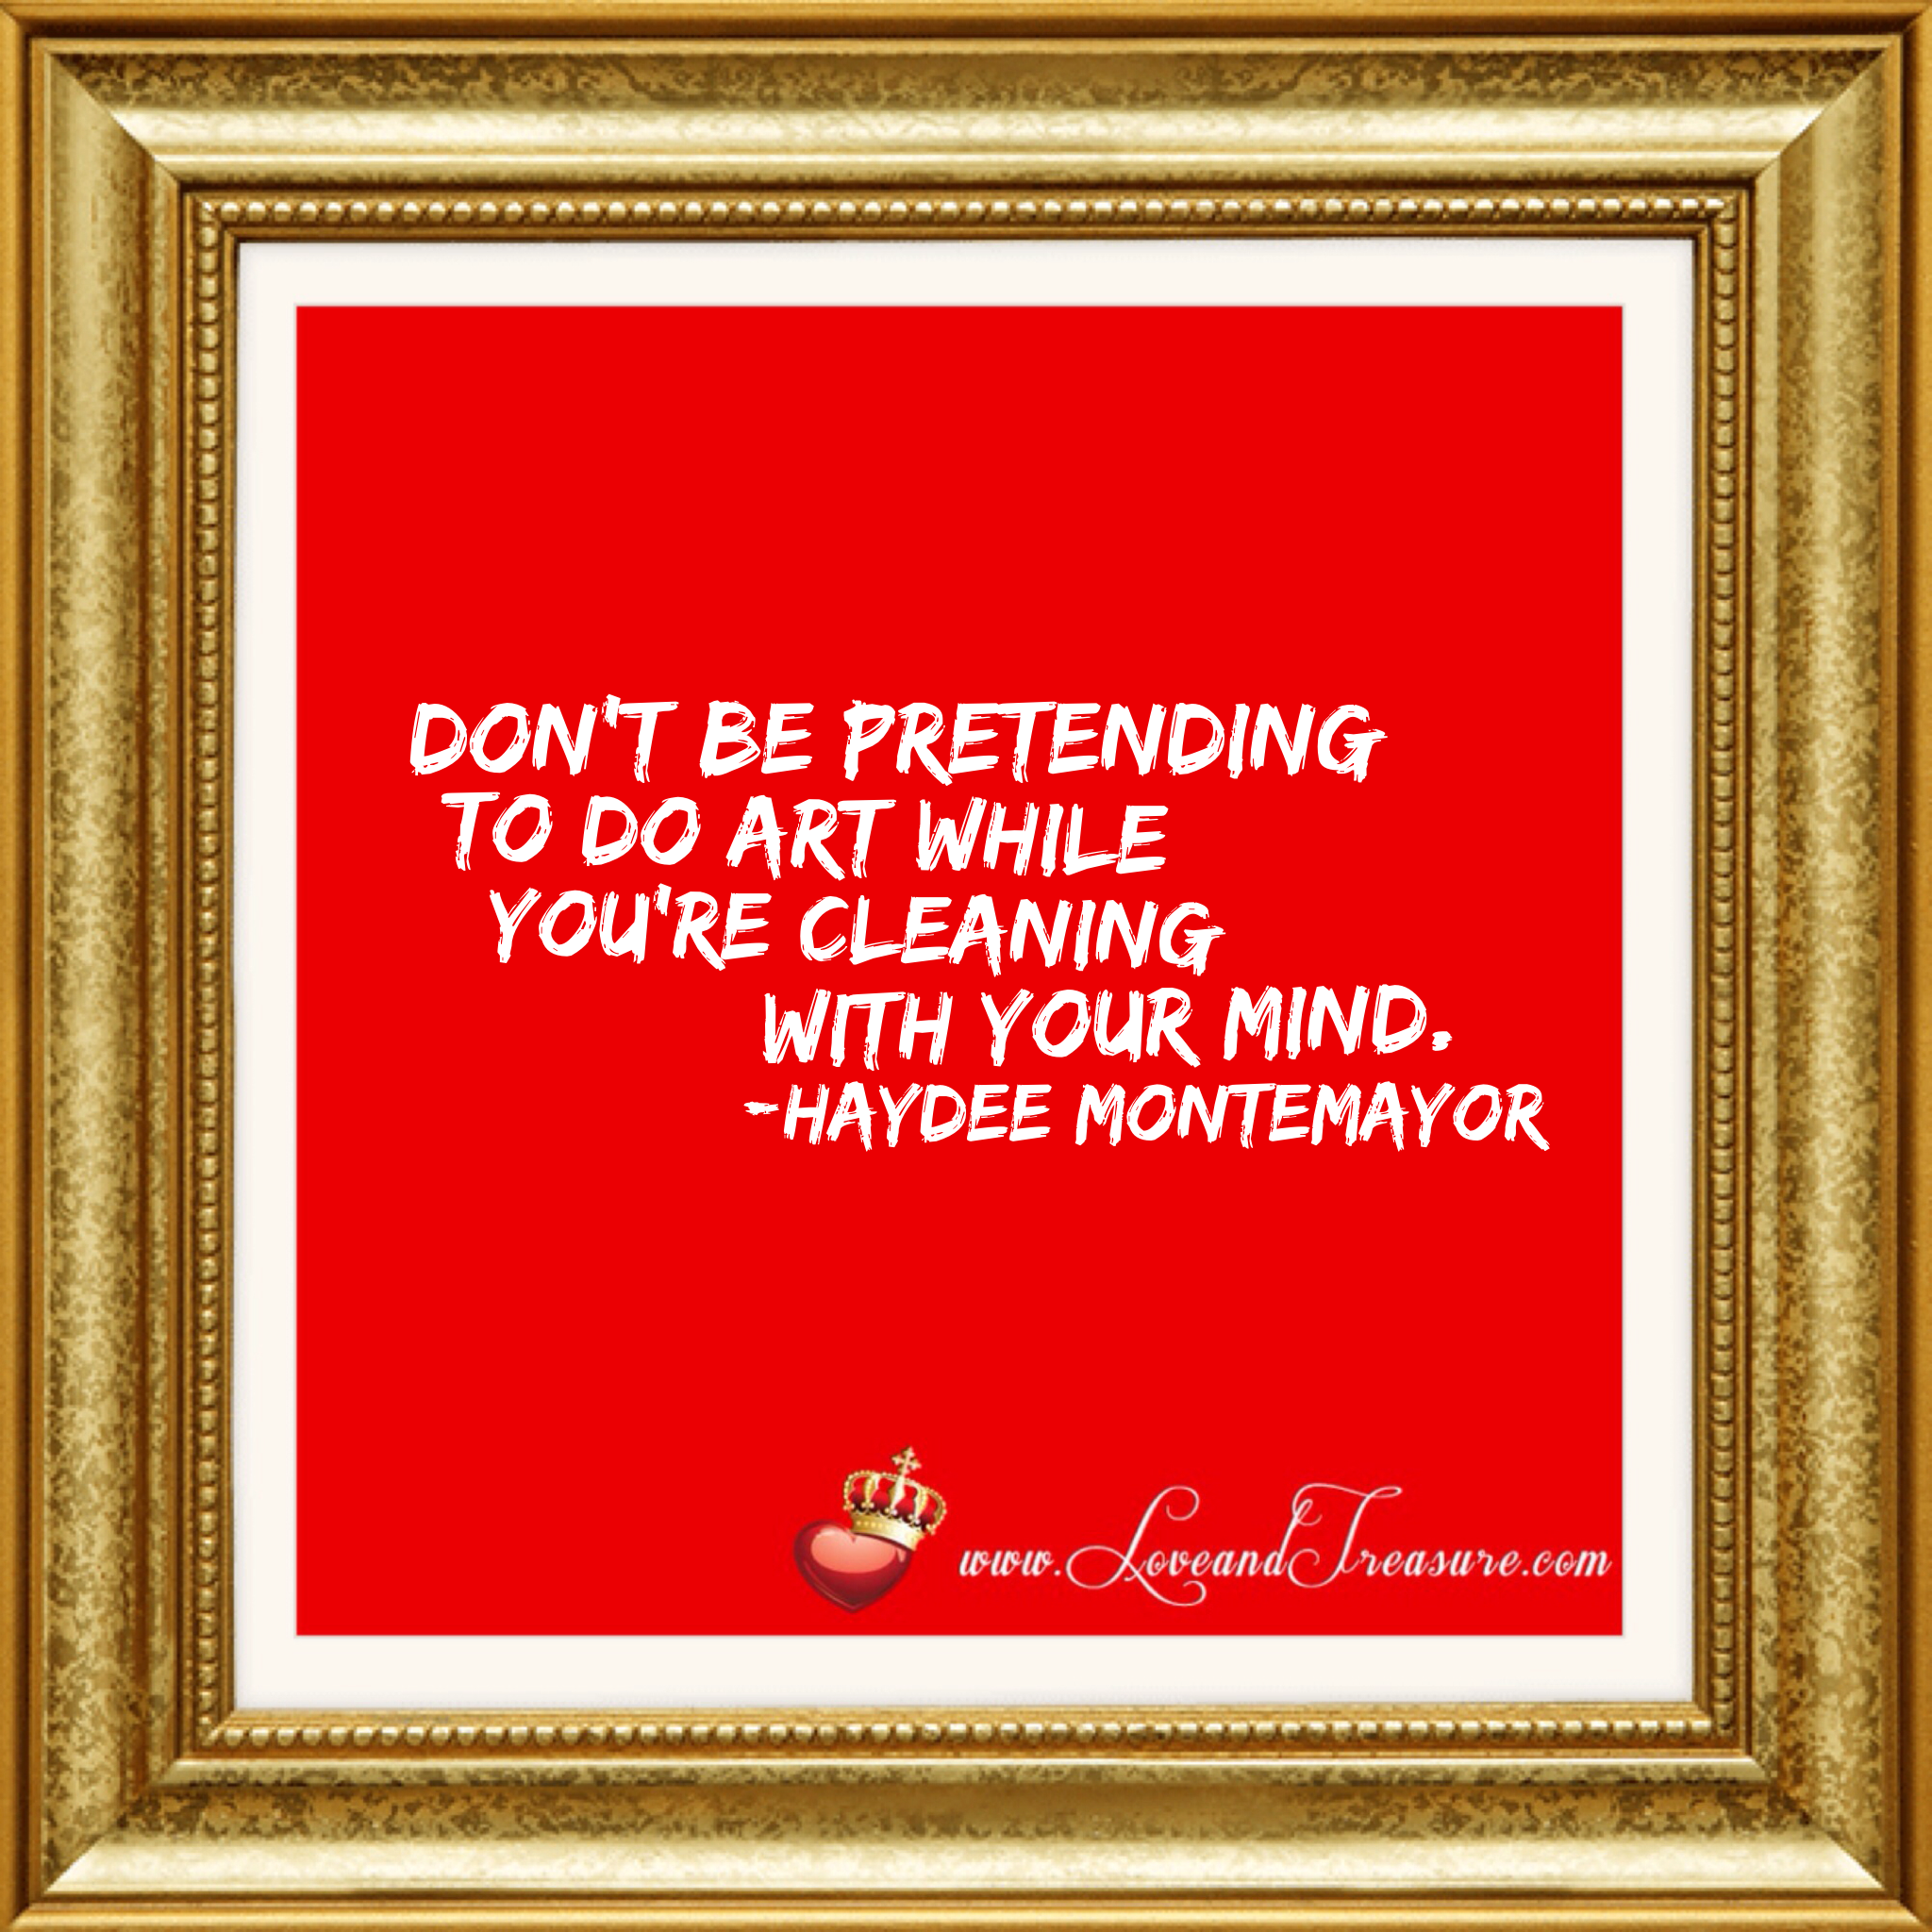 Don't be pretending to do art while you're cleaning with your mind by Haydee Montemayor from Love and Treasure blog www.loveandtreasure.com